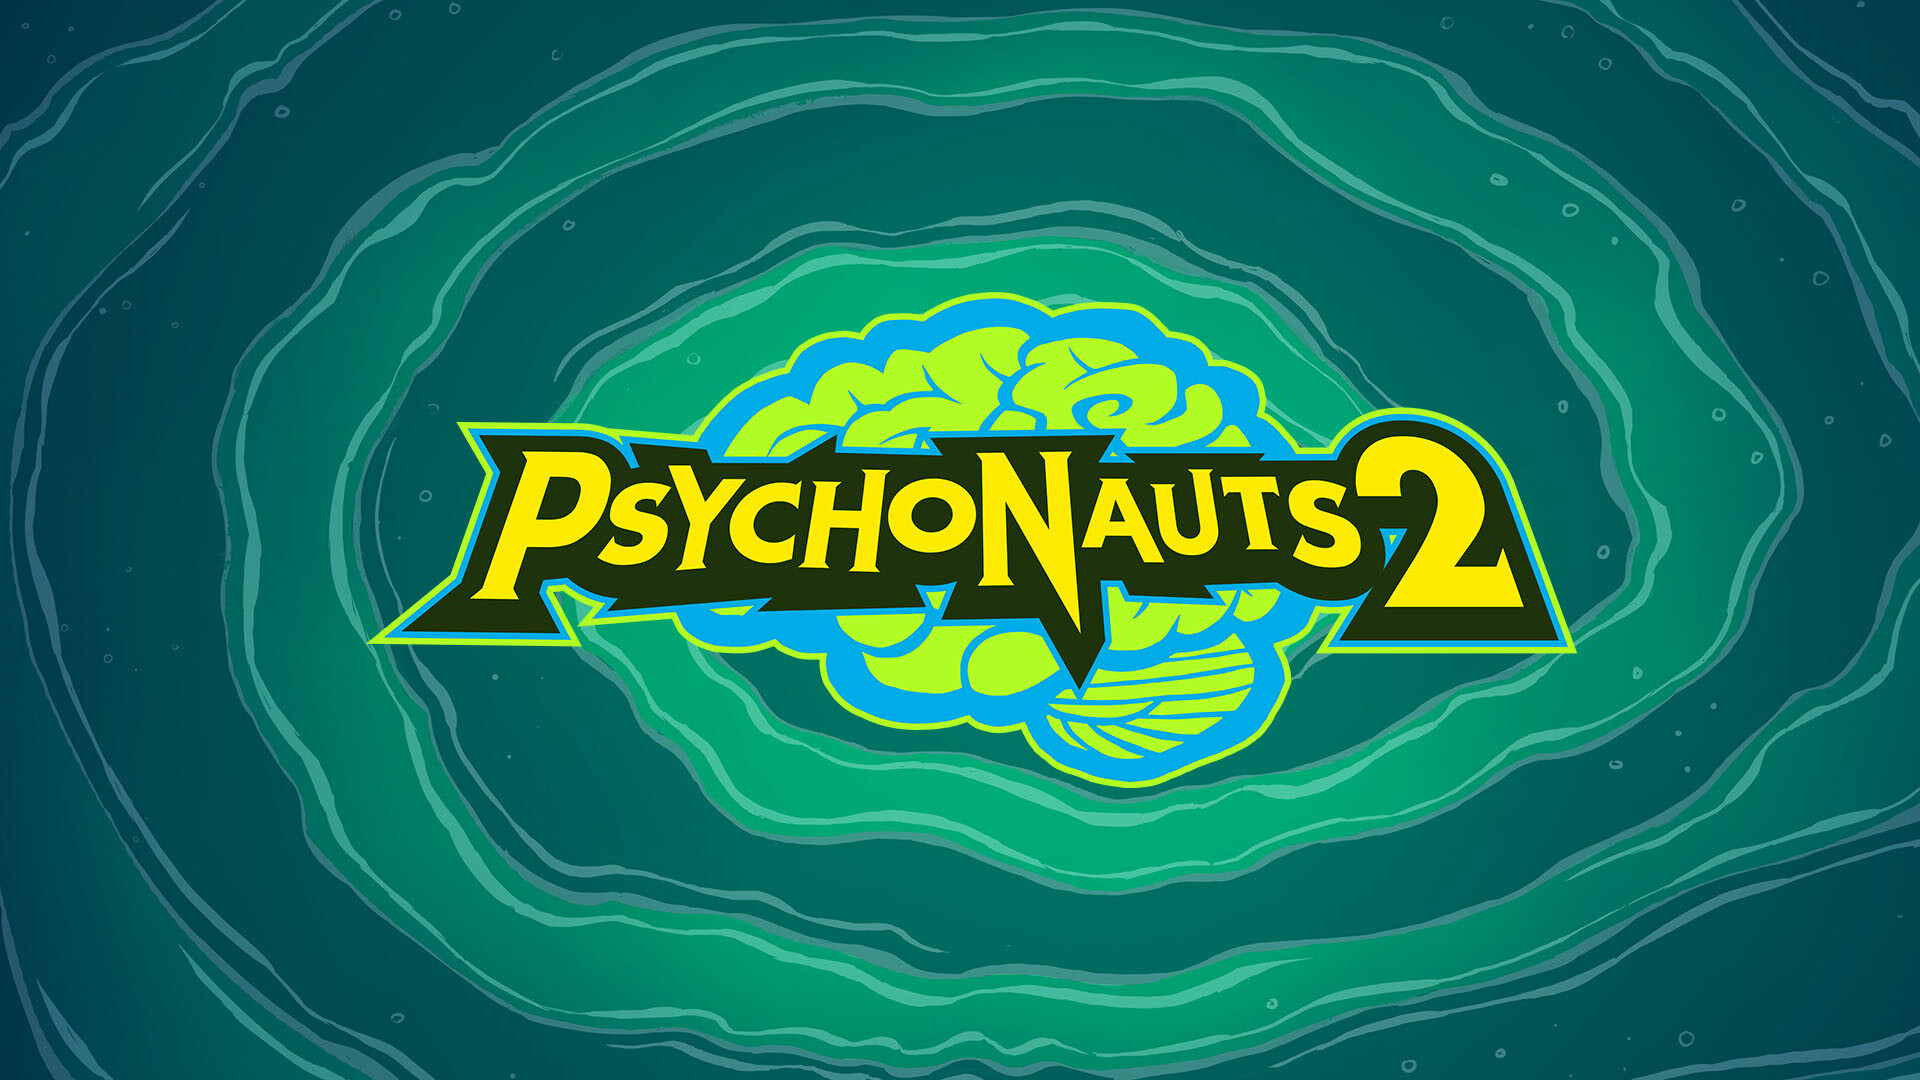 Psychonauts 2: Platformer, Developed by Double Fine Productions. 1920x1080 Full HD Wallpaper.